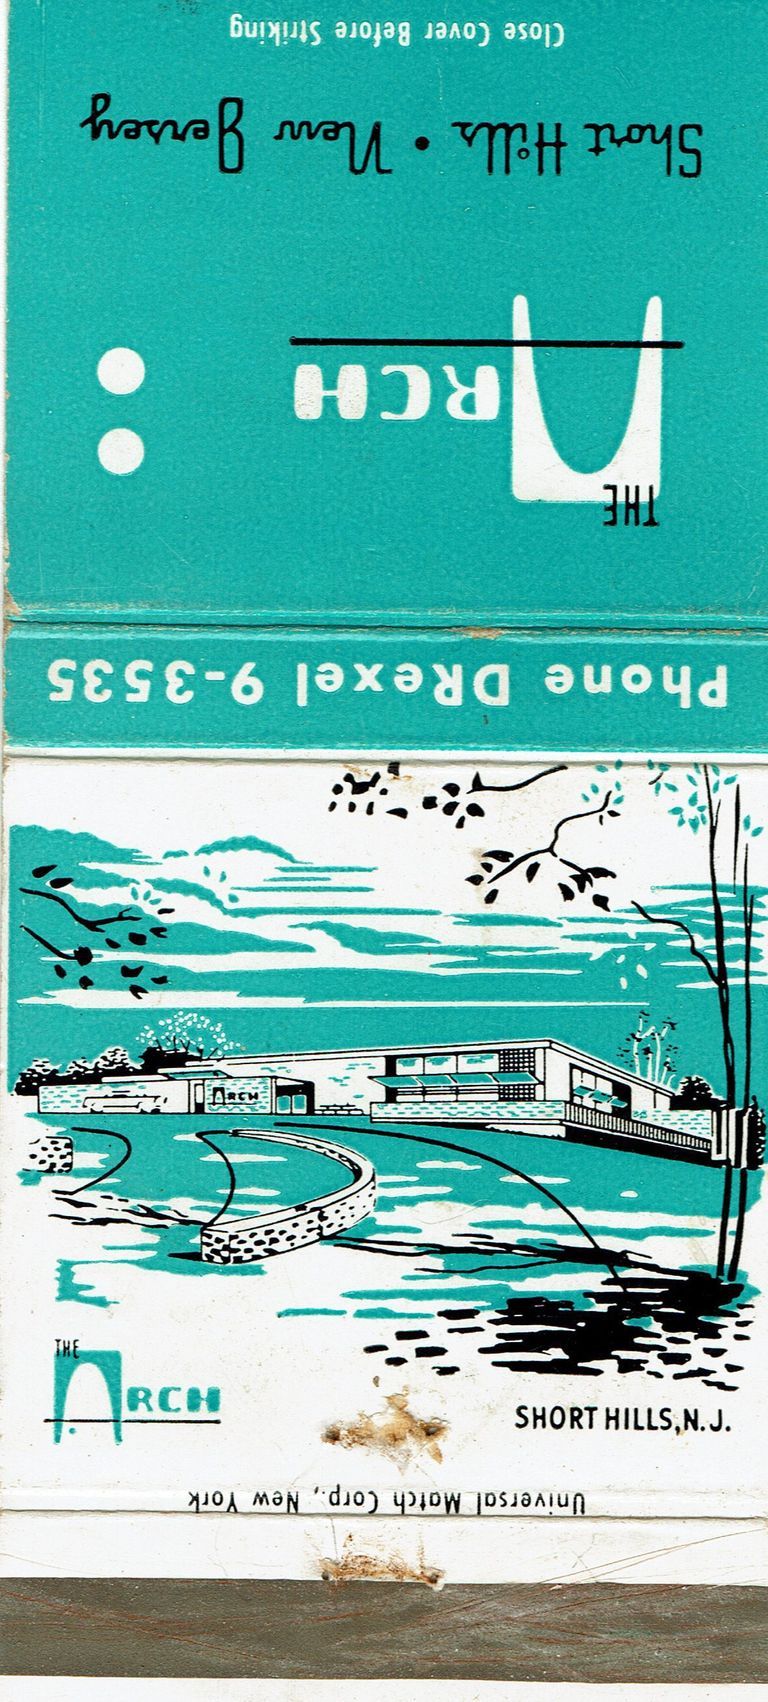          Arch Restaurant: The Arch Restaurant, Short Hills Matchbook Cover picture number 1
   